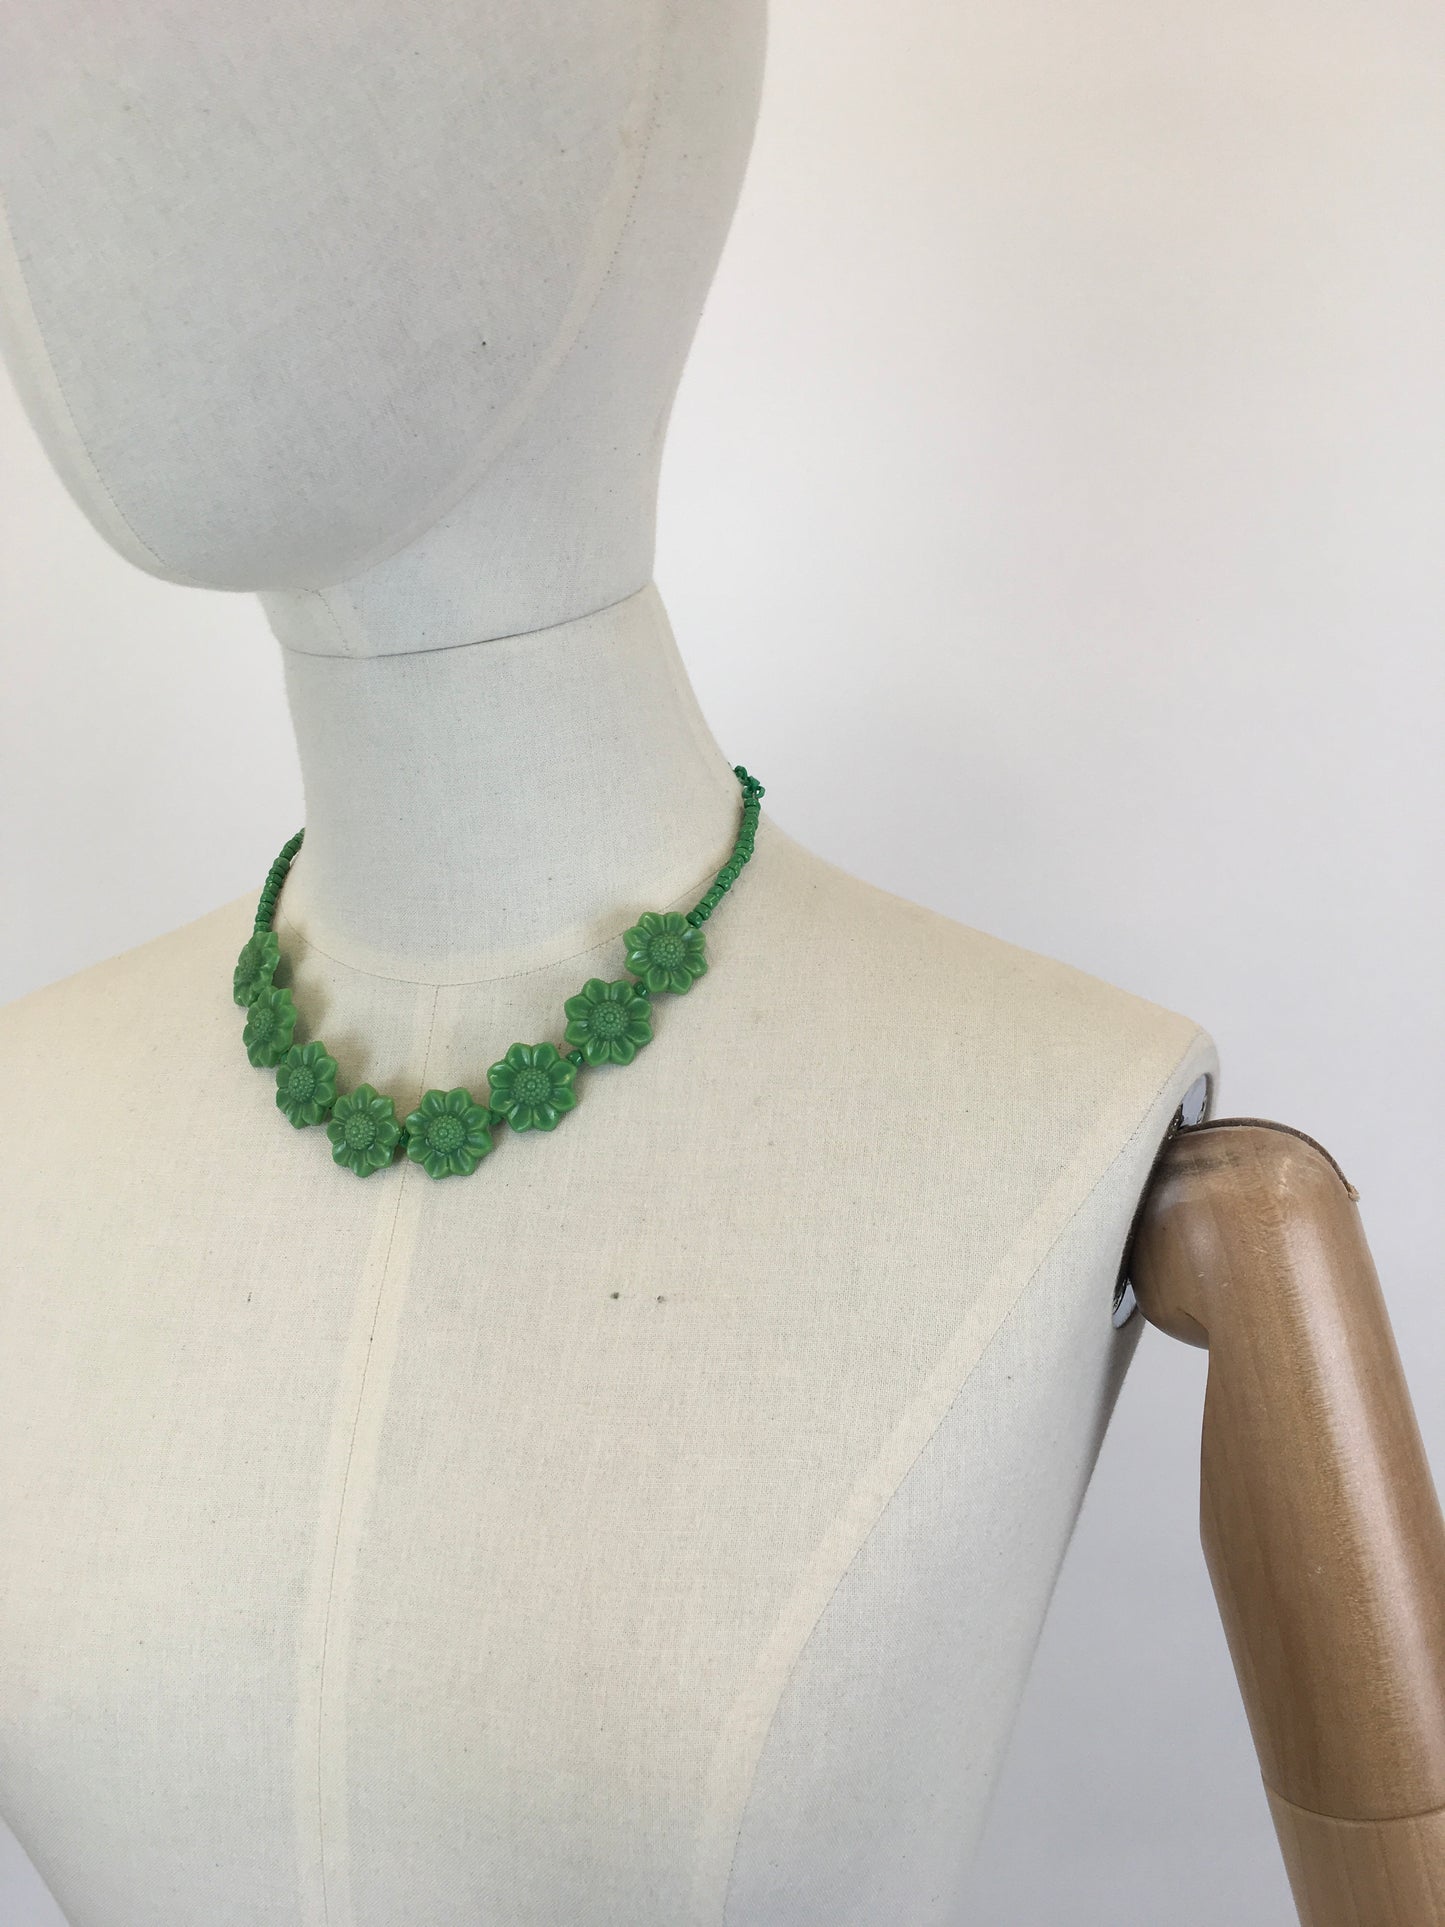 Original 1940’s Green Early Plastic Necklace - With Florals and Beads